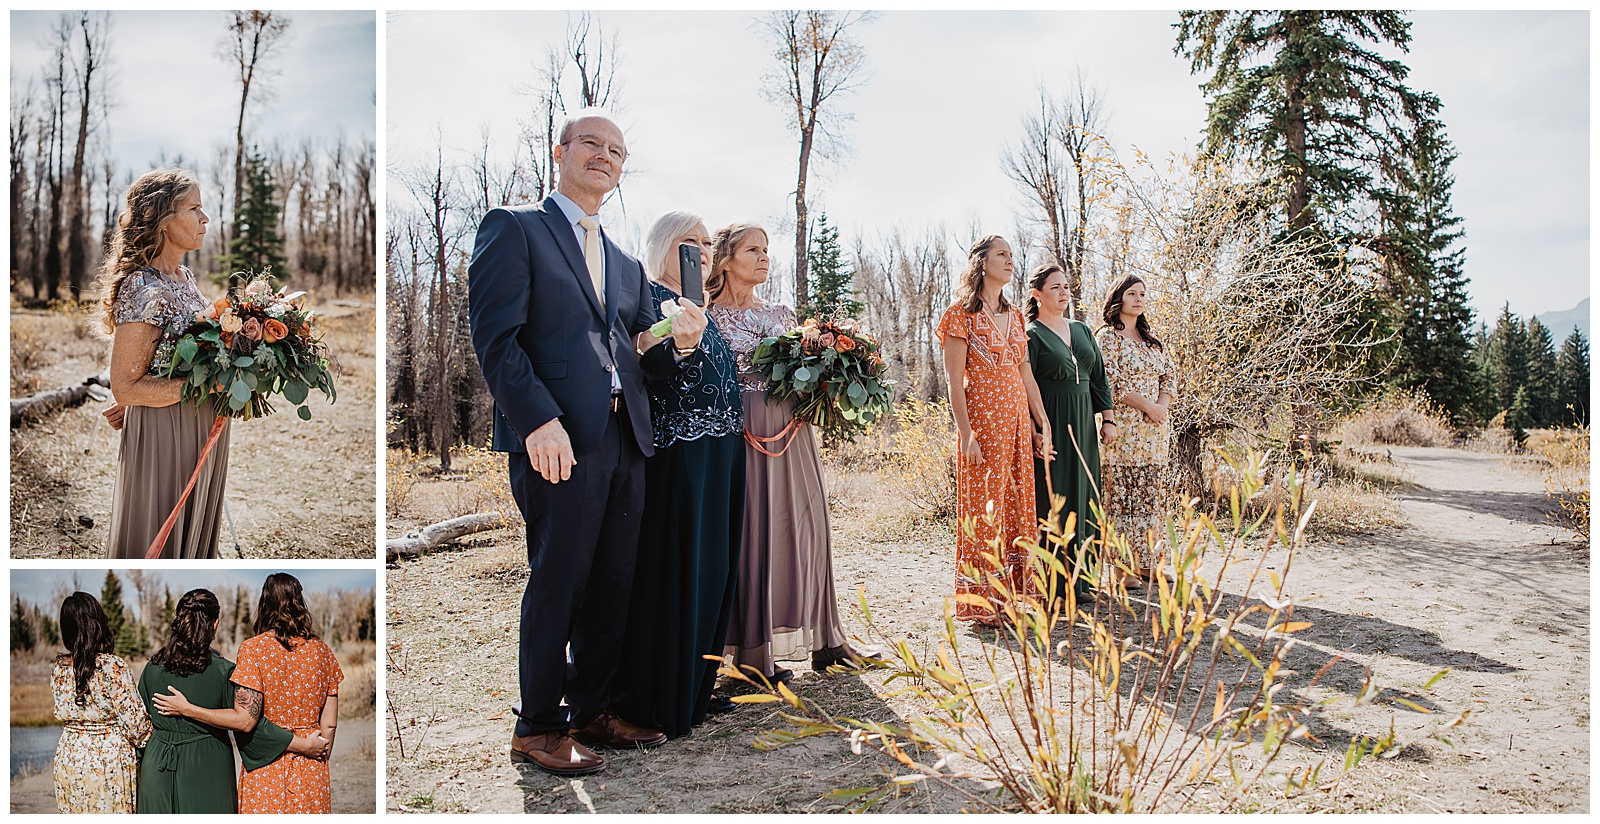 Grand Teton bridal party standing at the ceremony for the bride and groom in the woods